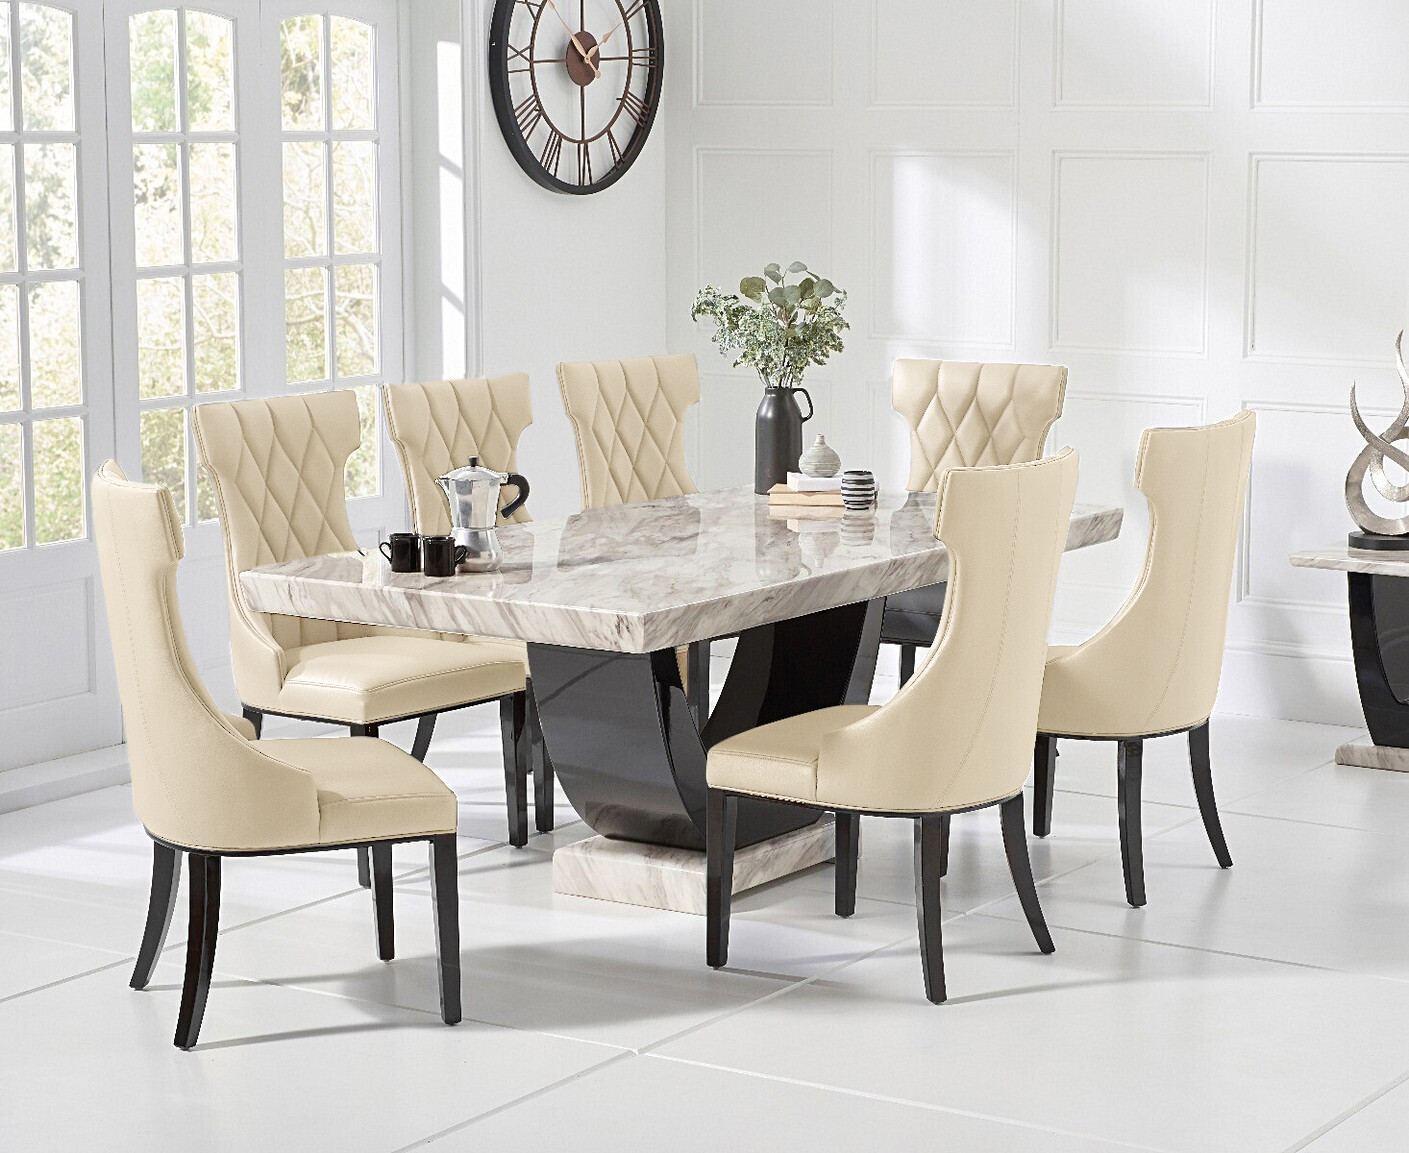 Photo 2 of Novara 200cm cream and black pedestal marble dining table with 10 cream sophia chairs